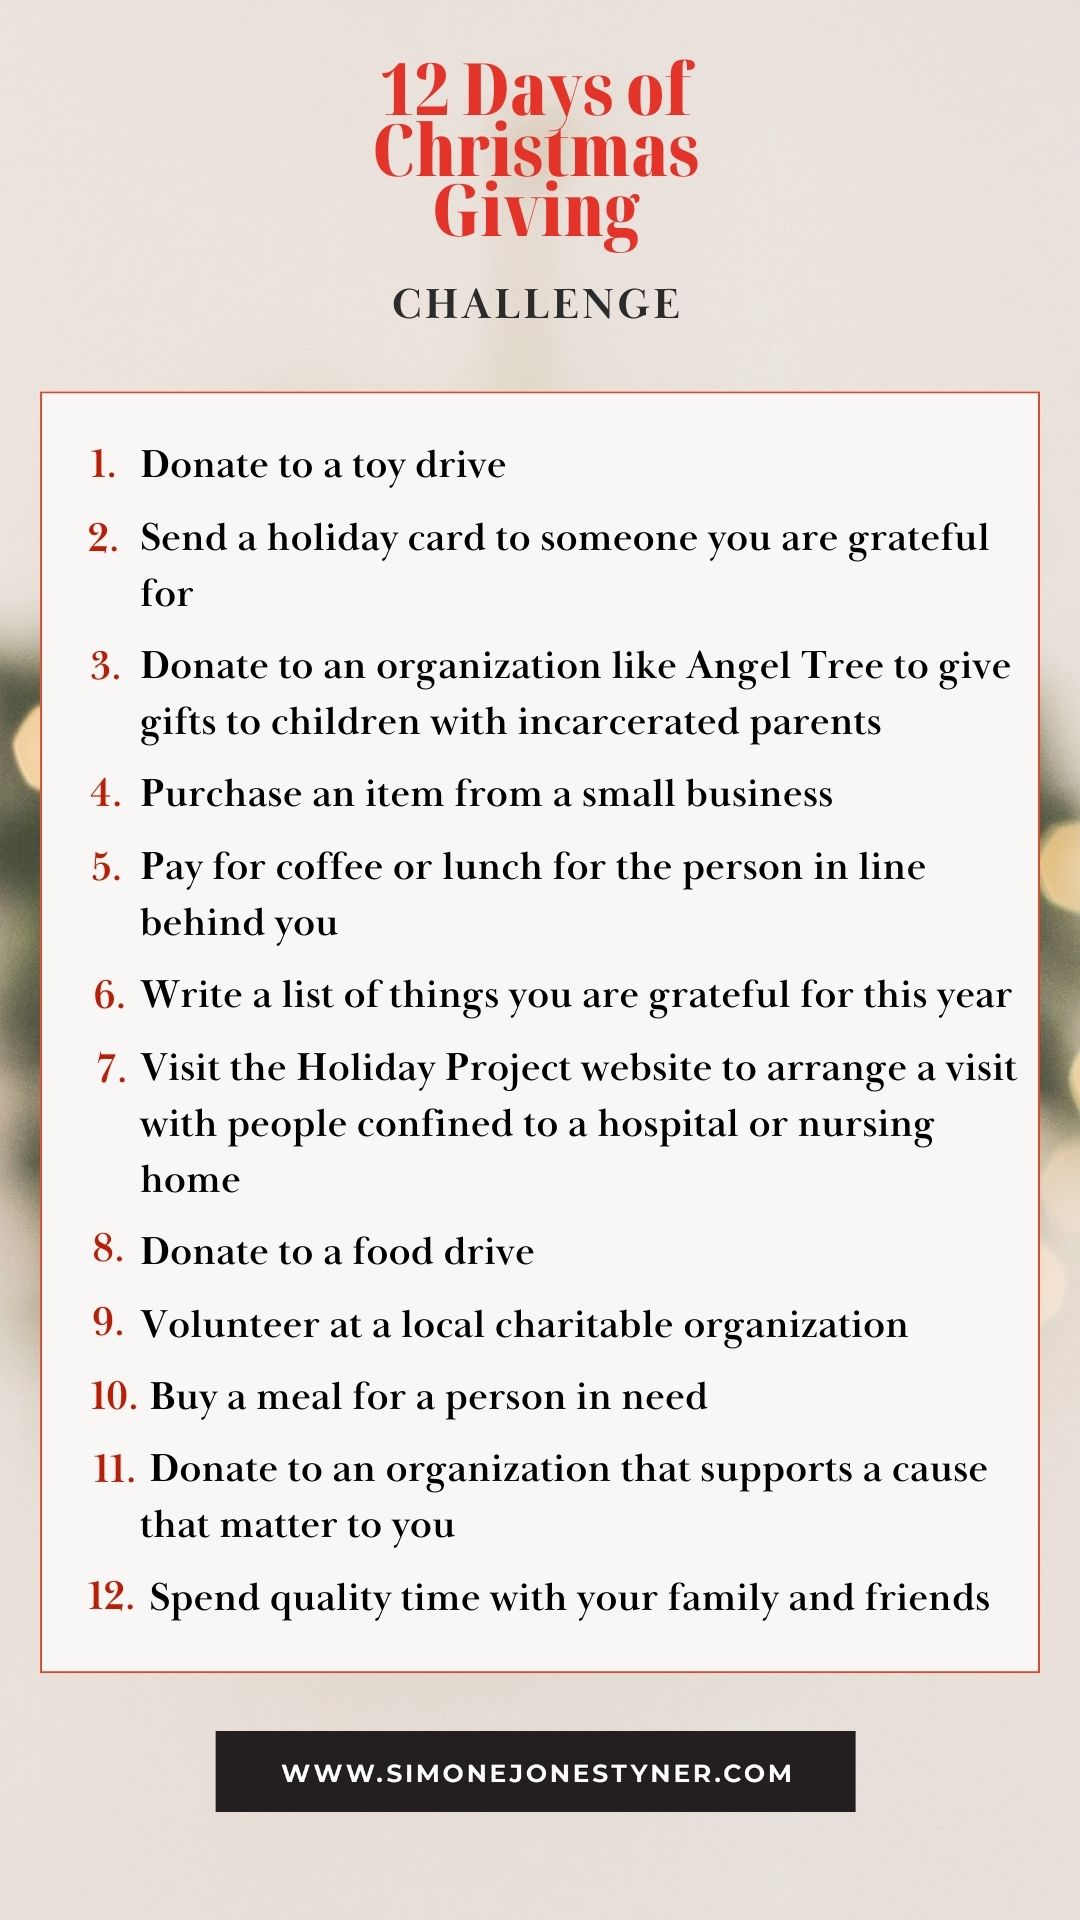 12 days of christmas giving challenge actions